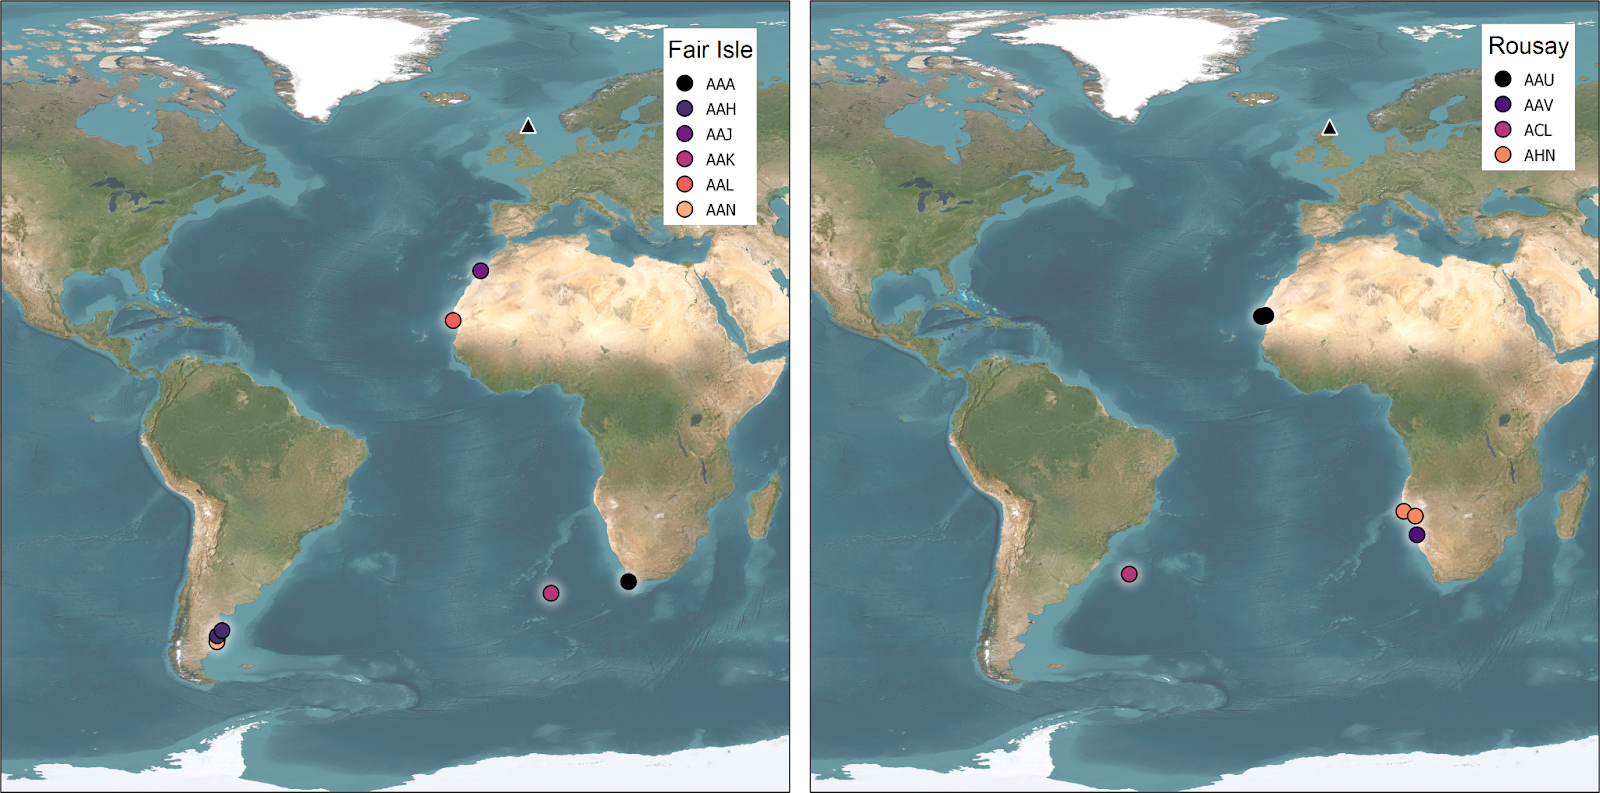 A map showing the mid-winter locations of each tracked Arctic Skua from Fair Isle and Rousay in the Canary Current off northwest Africa, Benguela Current off southwest Africa and the Patagonian Shelf off eastern South America., For birds with two years' of data, wintering locations are almost exactly the same.